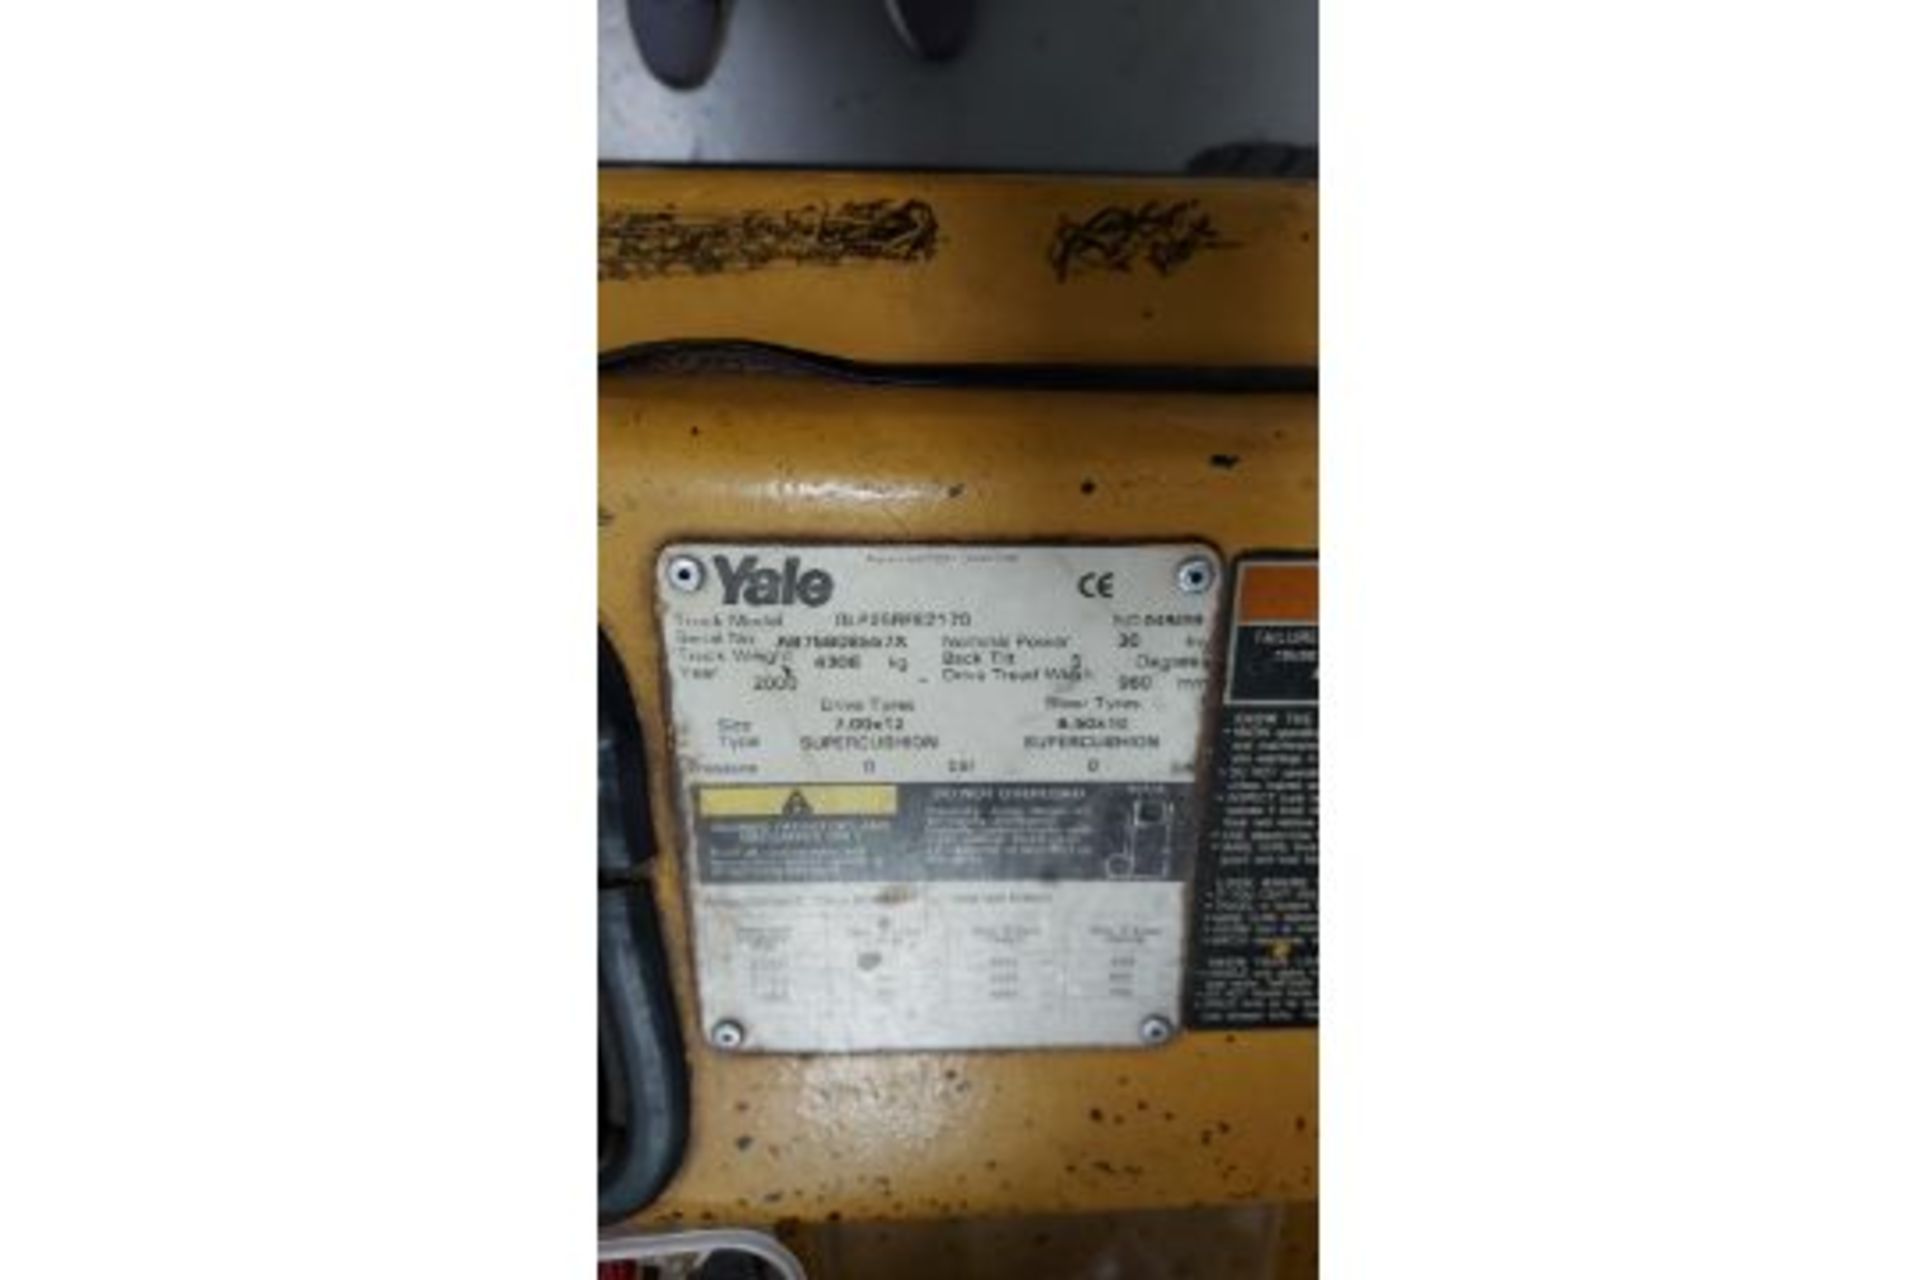 Yale GLP25RFE2170 Gas Forklift Truck. 2.5 Ton Capacity, Last Service 26/05/23, Running Hours 10,881 - Image 2 of 2